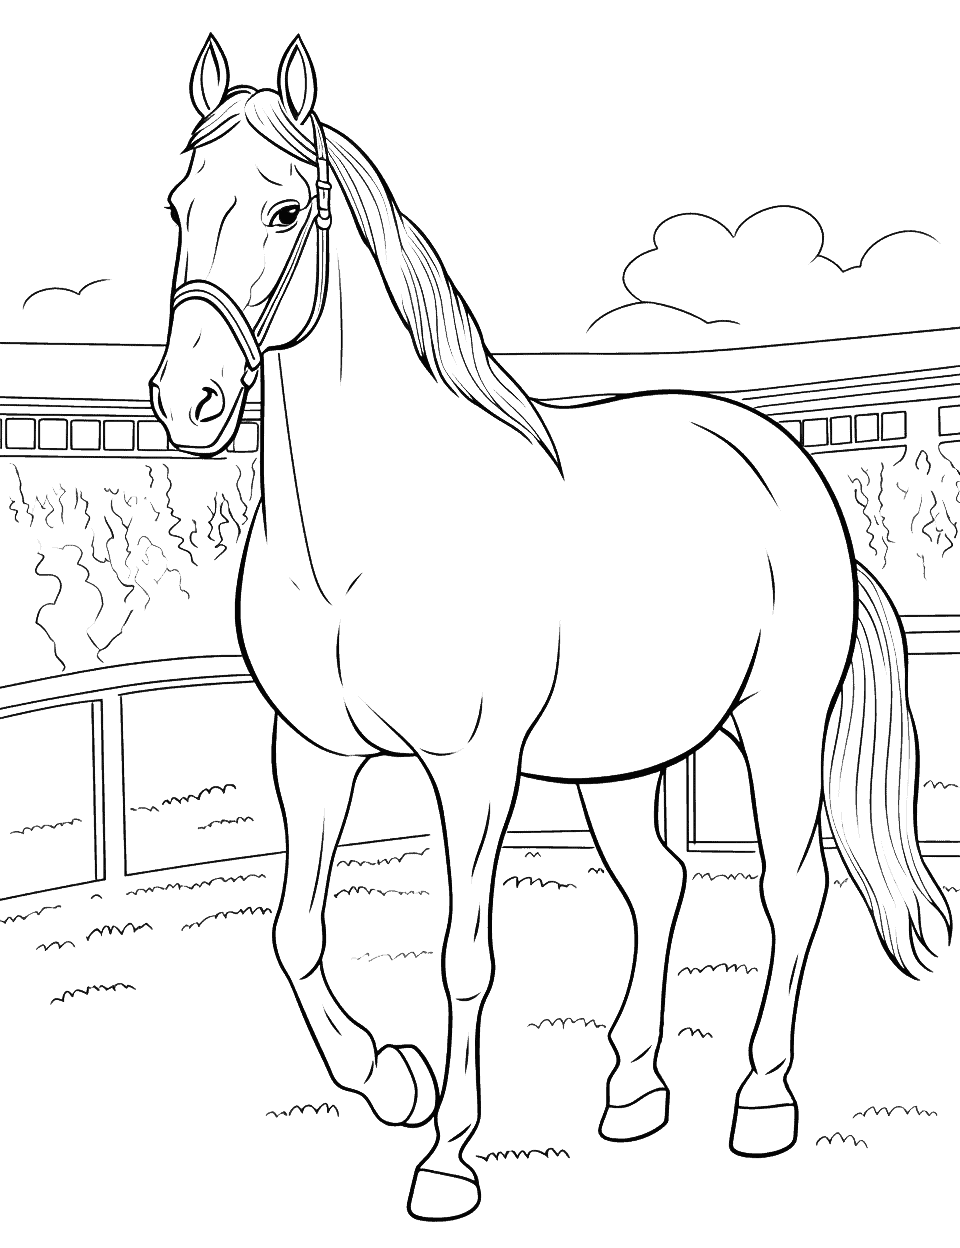 Breyer Horse Show Coloring Page - A Breyer horse show with a beautiful horse on display.